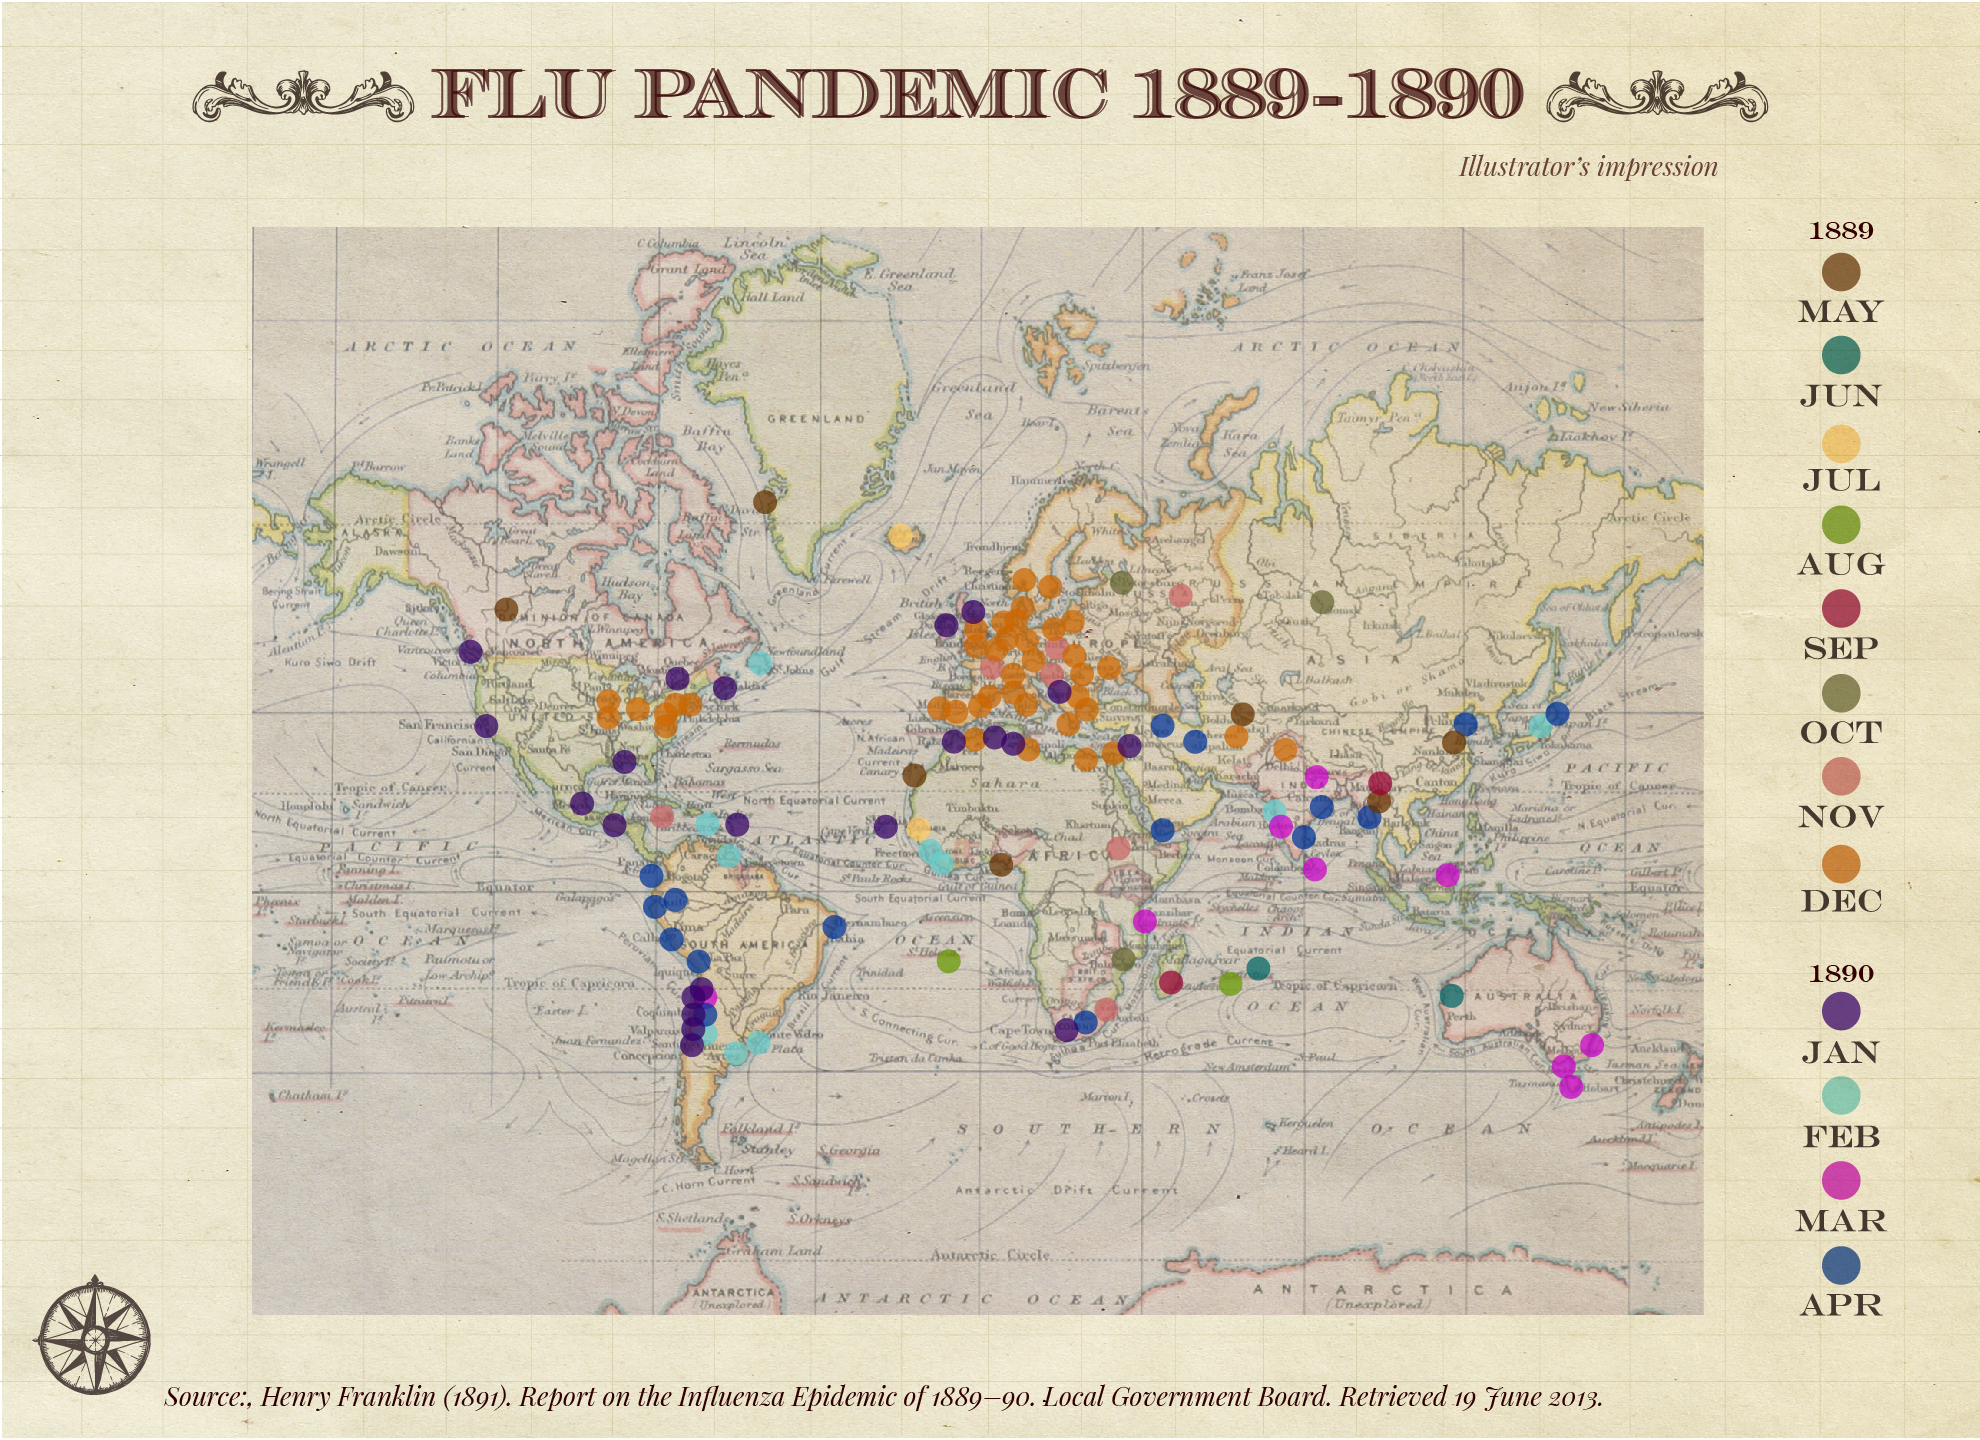 DO NOT USE: INTERACTIVE: Flu pandemic 1889 map